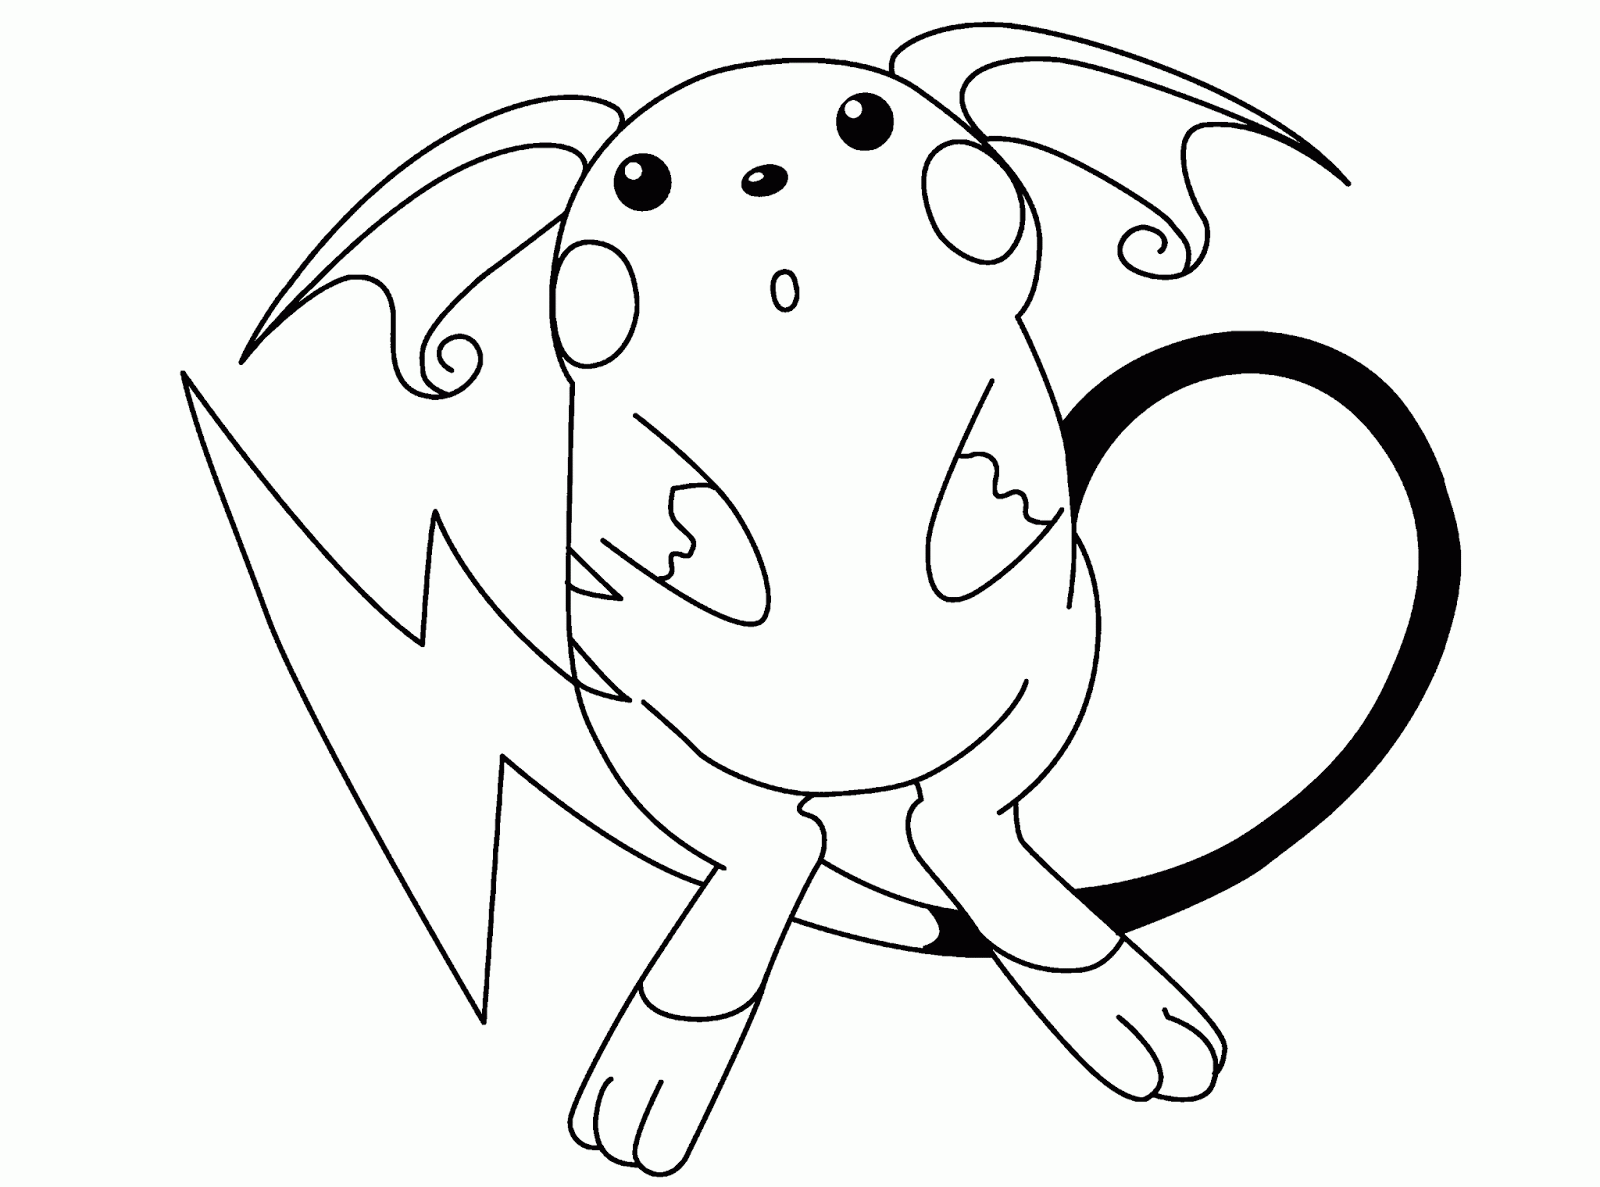 Coloring Pages: Pokemon Coloring Pages Free and Printable